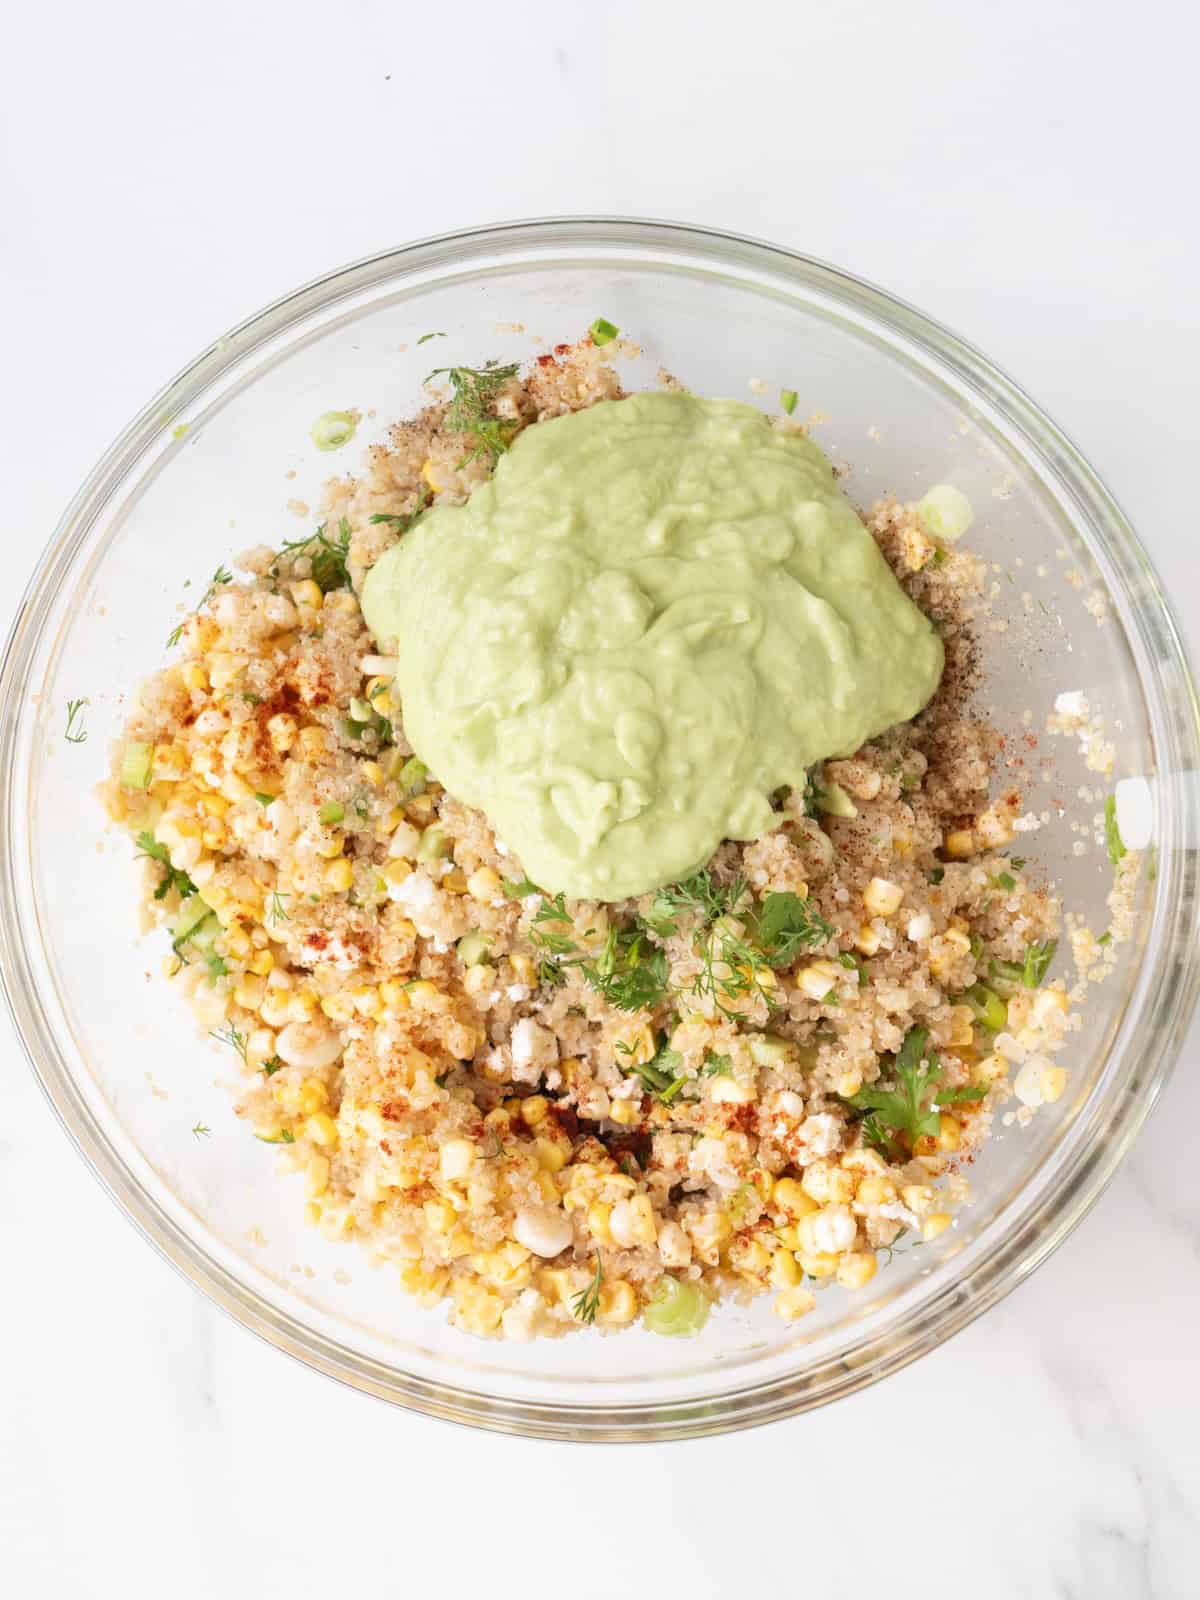 A bowl with mexican corn and quinoa salad being prepared and avocado dressing just added.